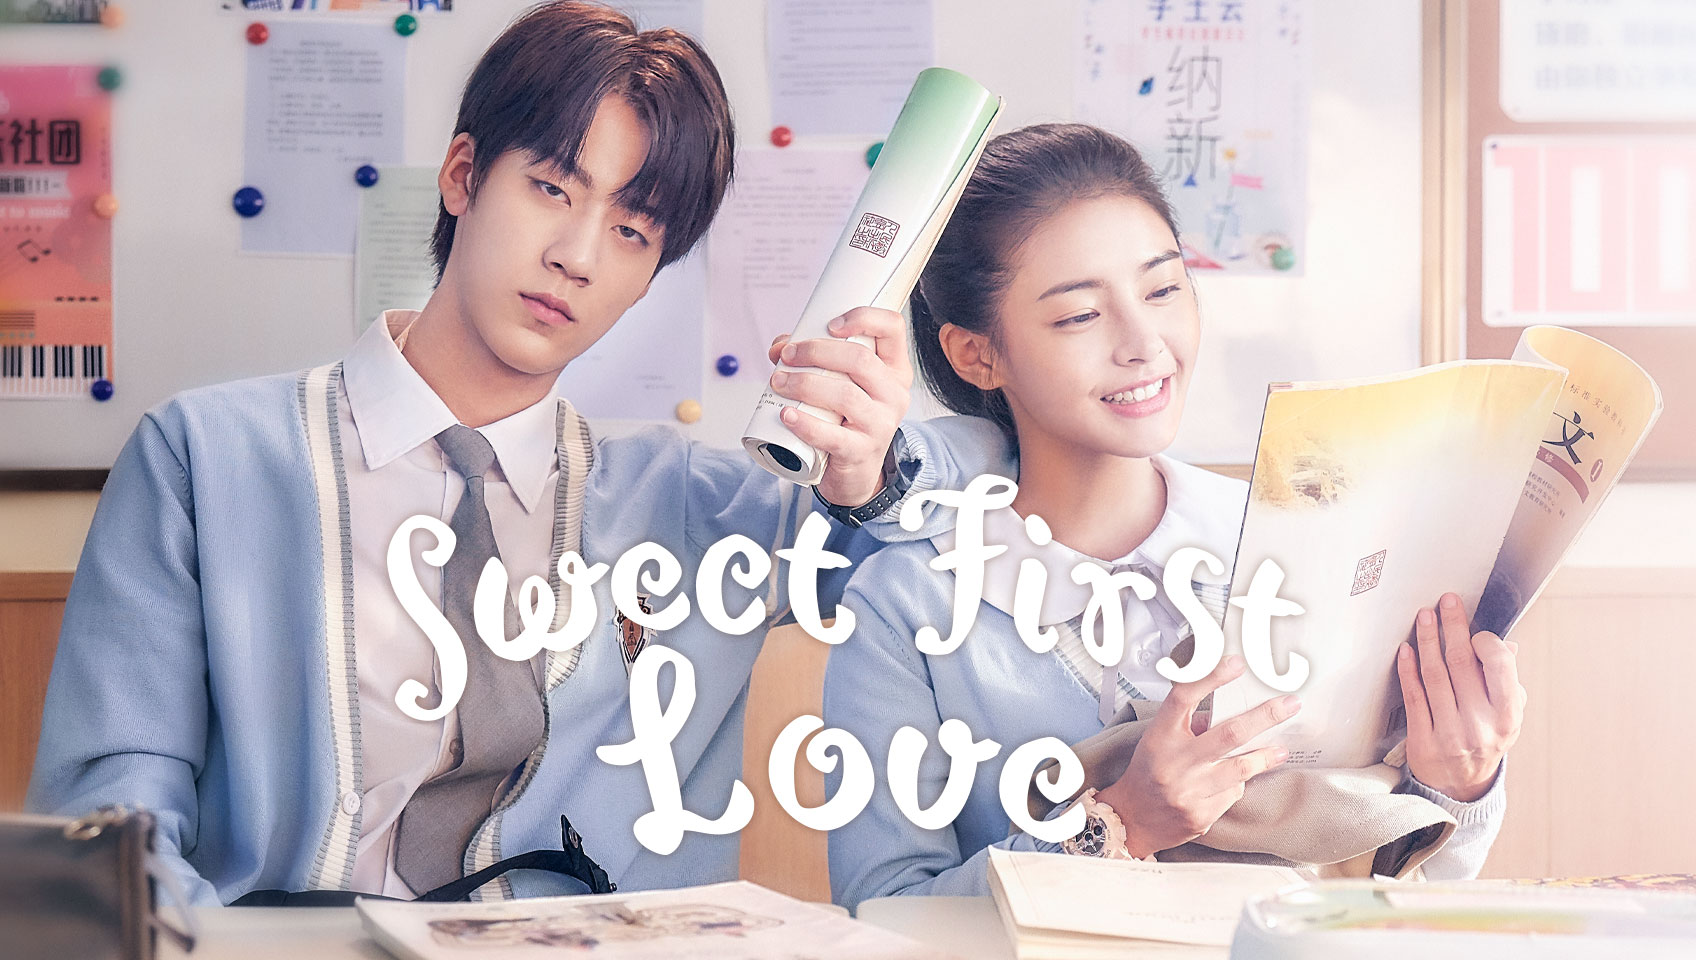 first love thailand movie full version subtitle indonesia fast